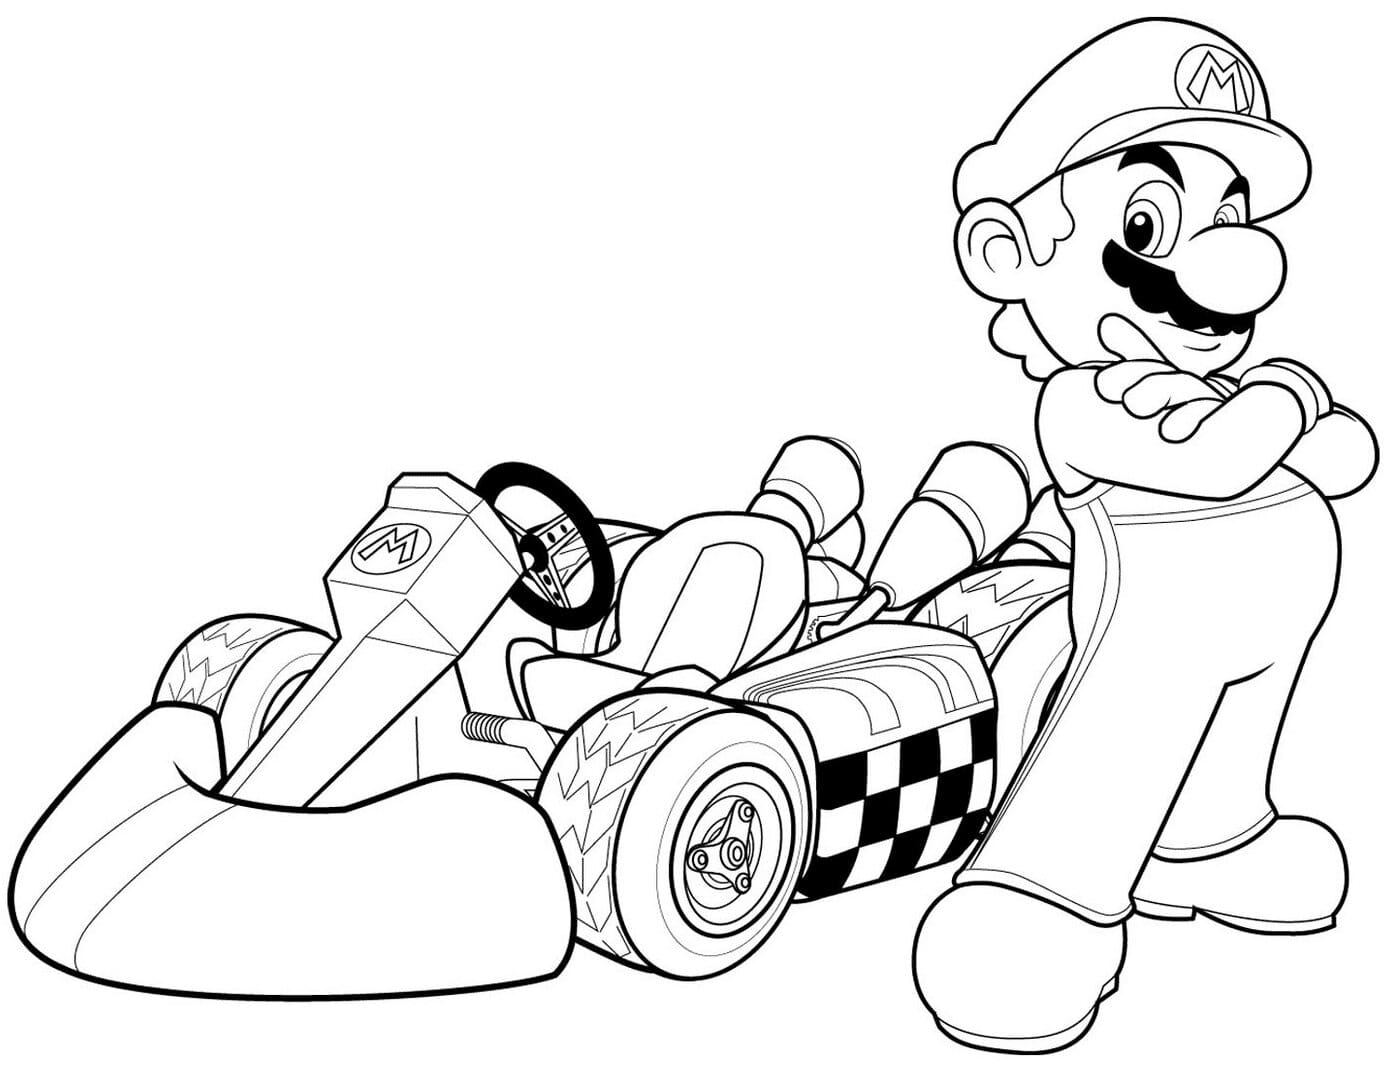 Mario and racing car in Mario Kart Wii Coloring Pages